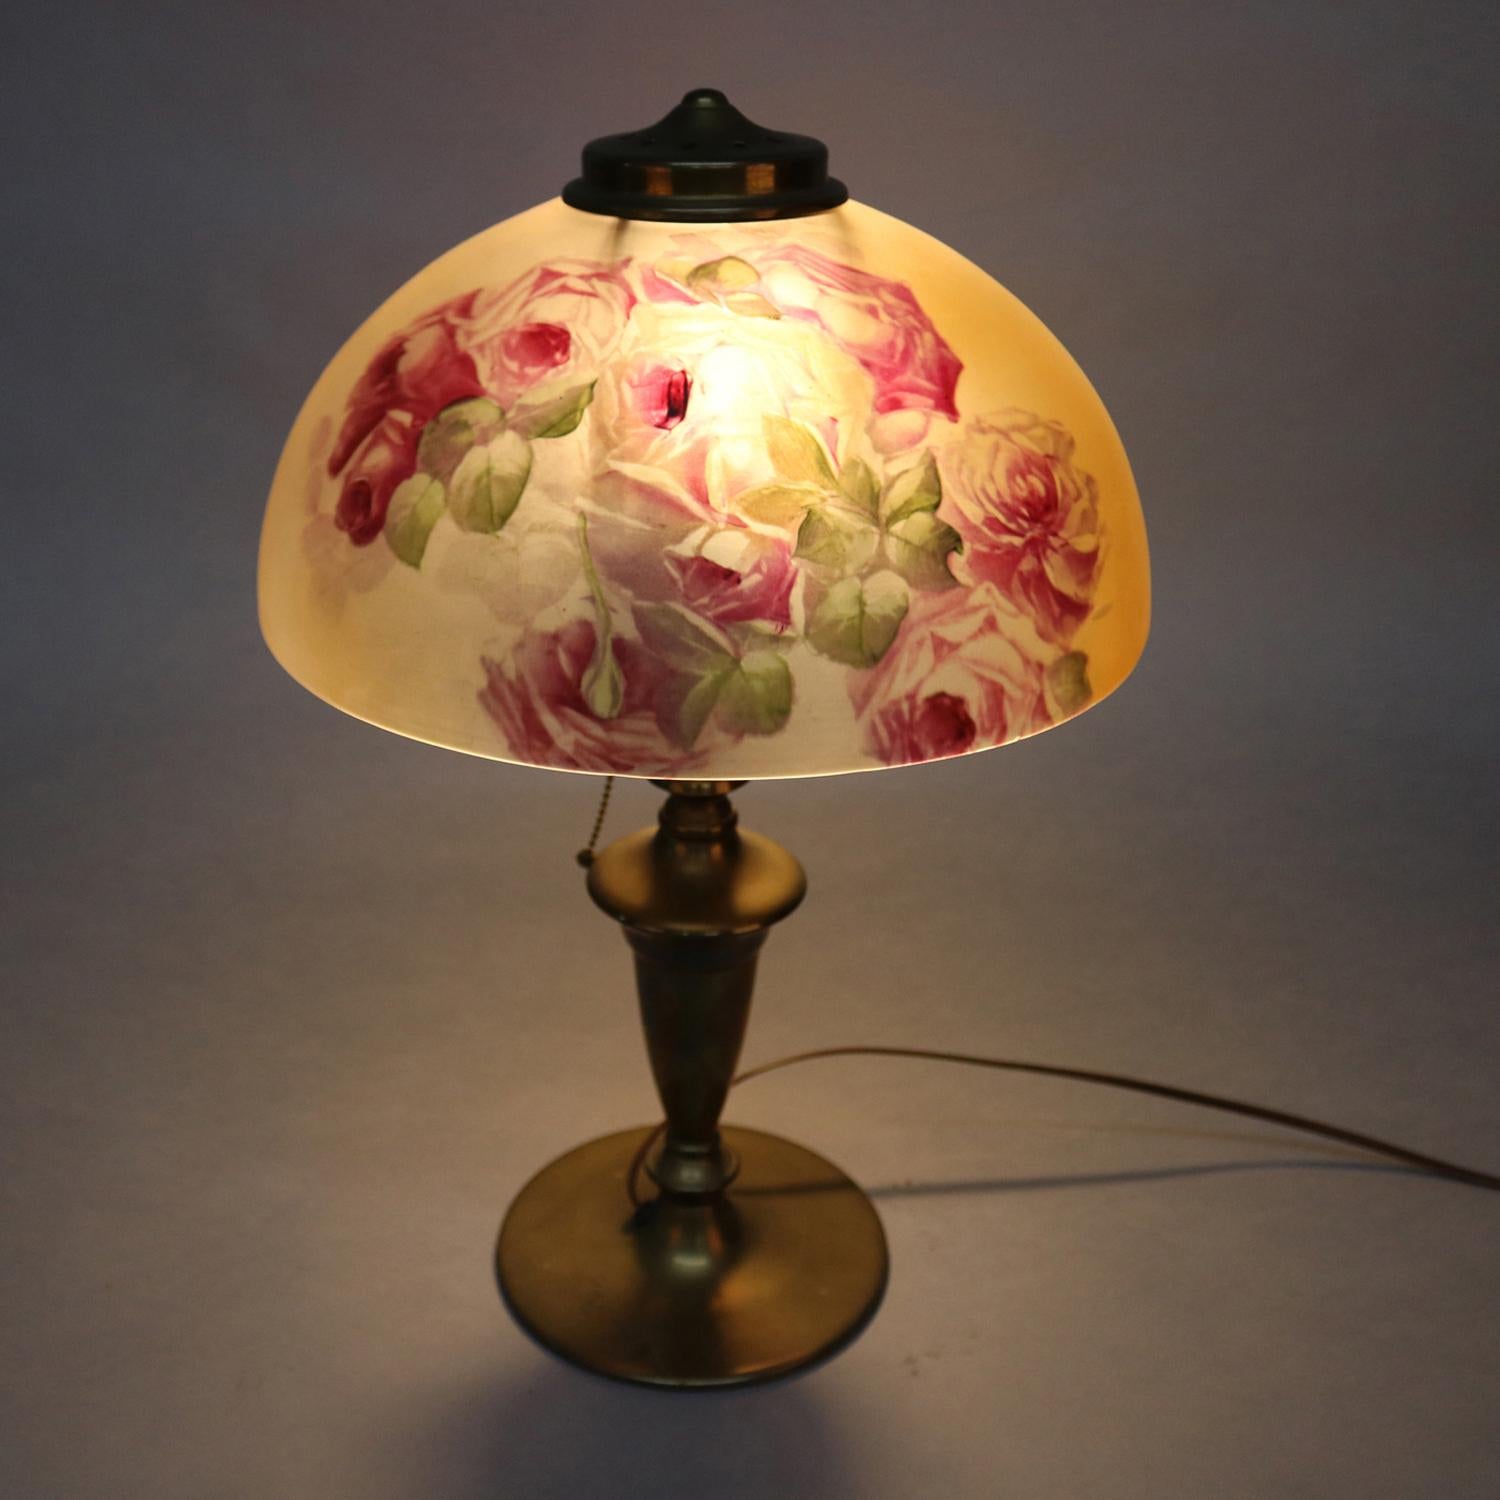 Arts & Crafts Pittsburgh table lamp features brass urn form base having two sockets, floral reverse painted glass shade with roses, circa 1920

Measures: 20